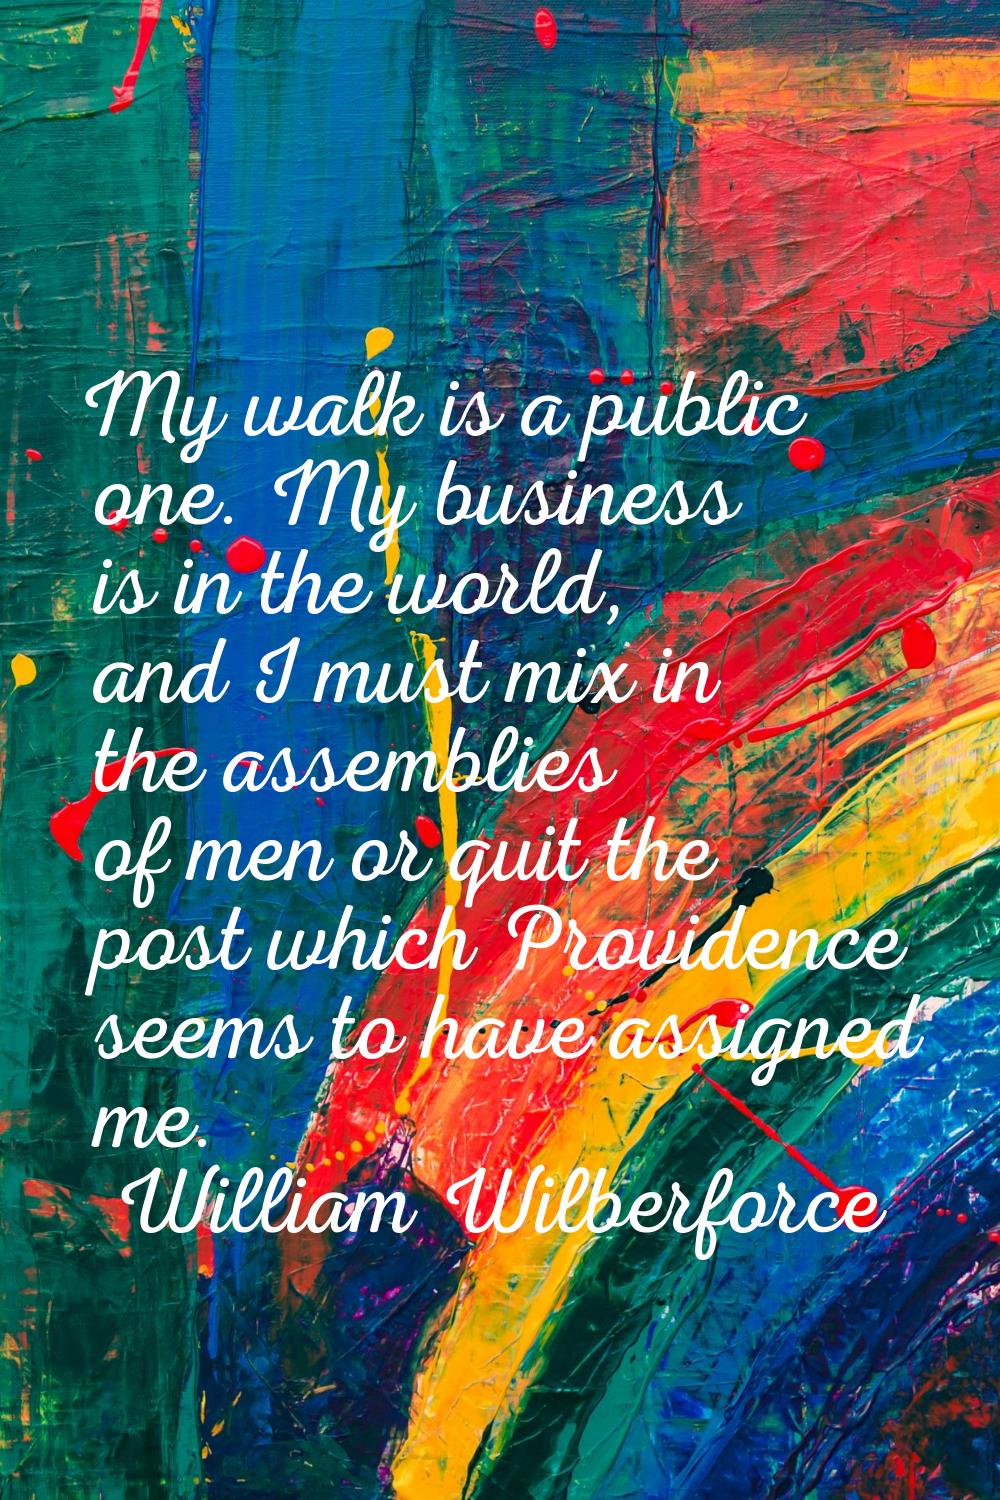 My walk is a public one. My business is in the world, and I must mix in the assemblies of men or qu